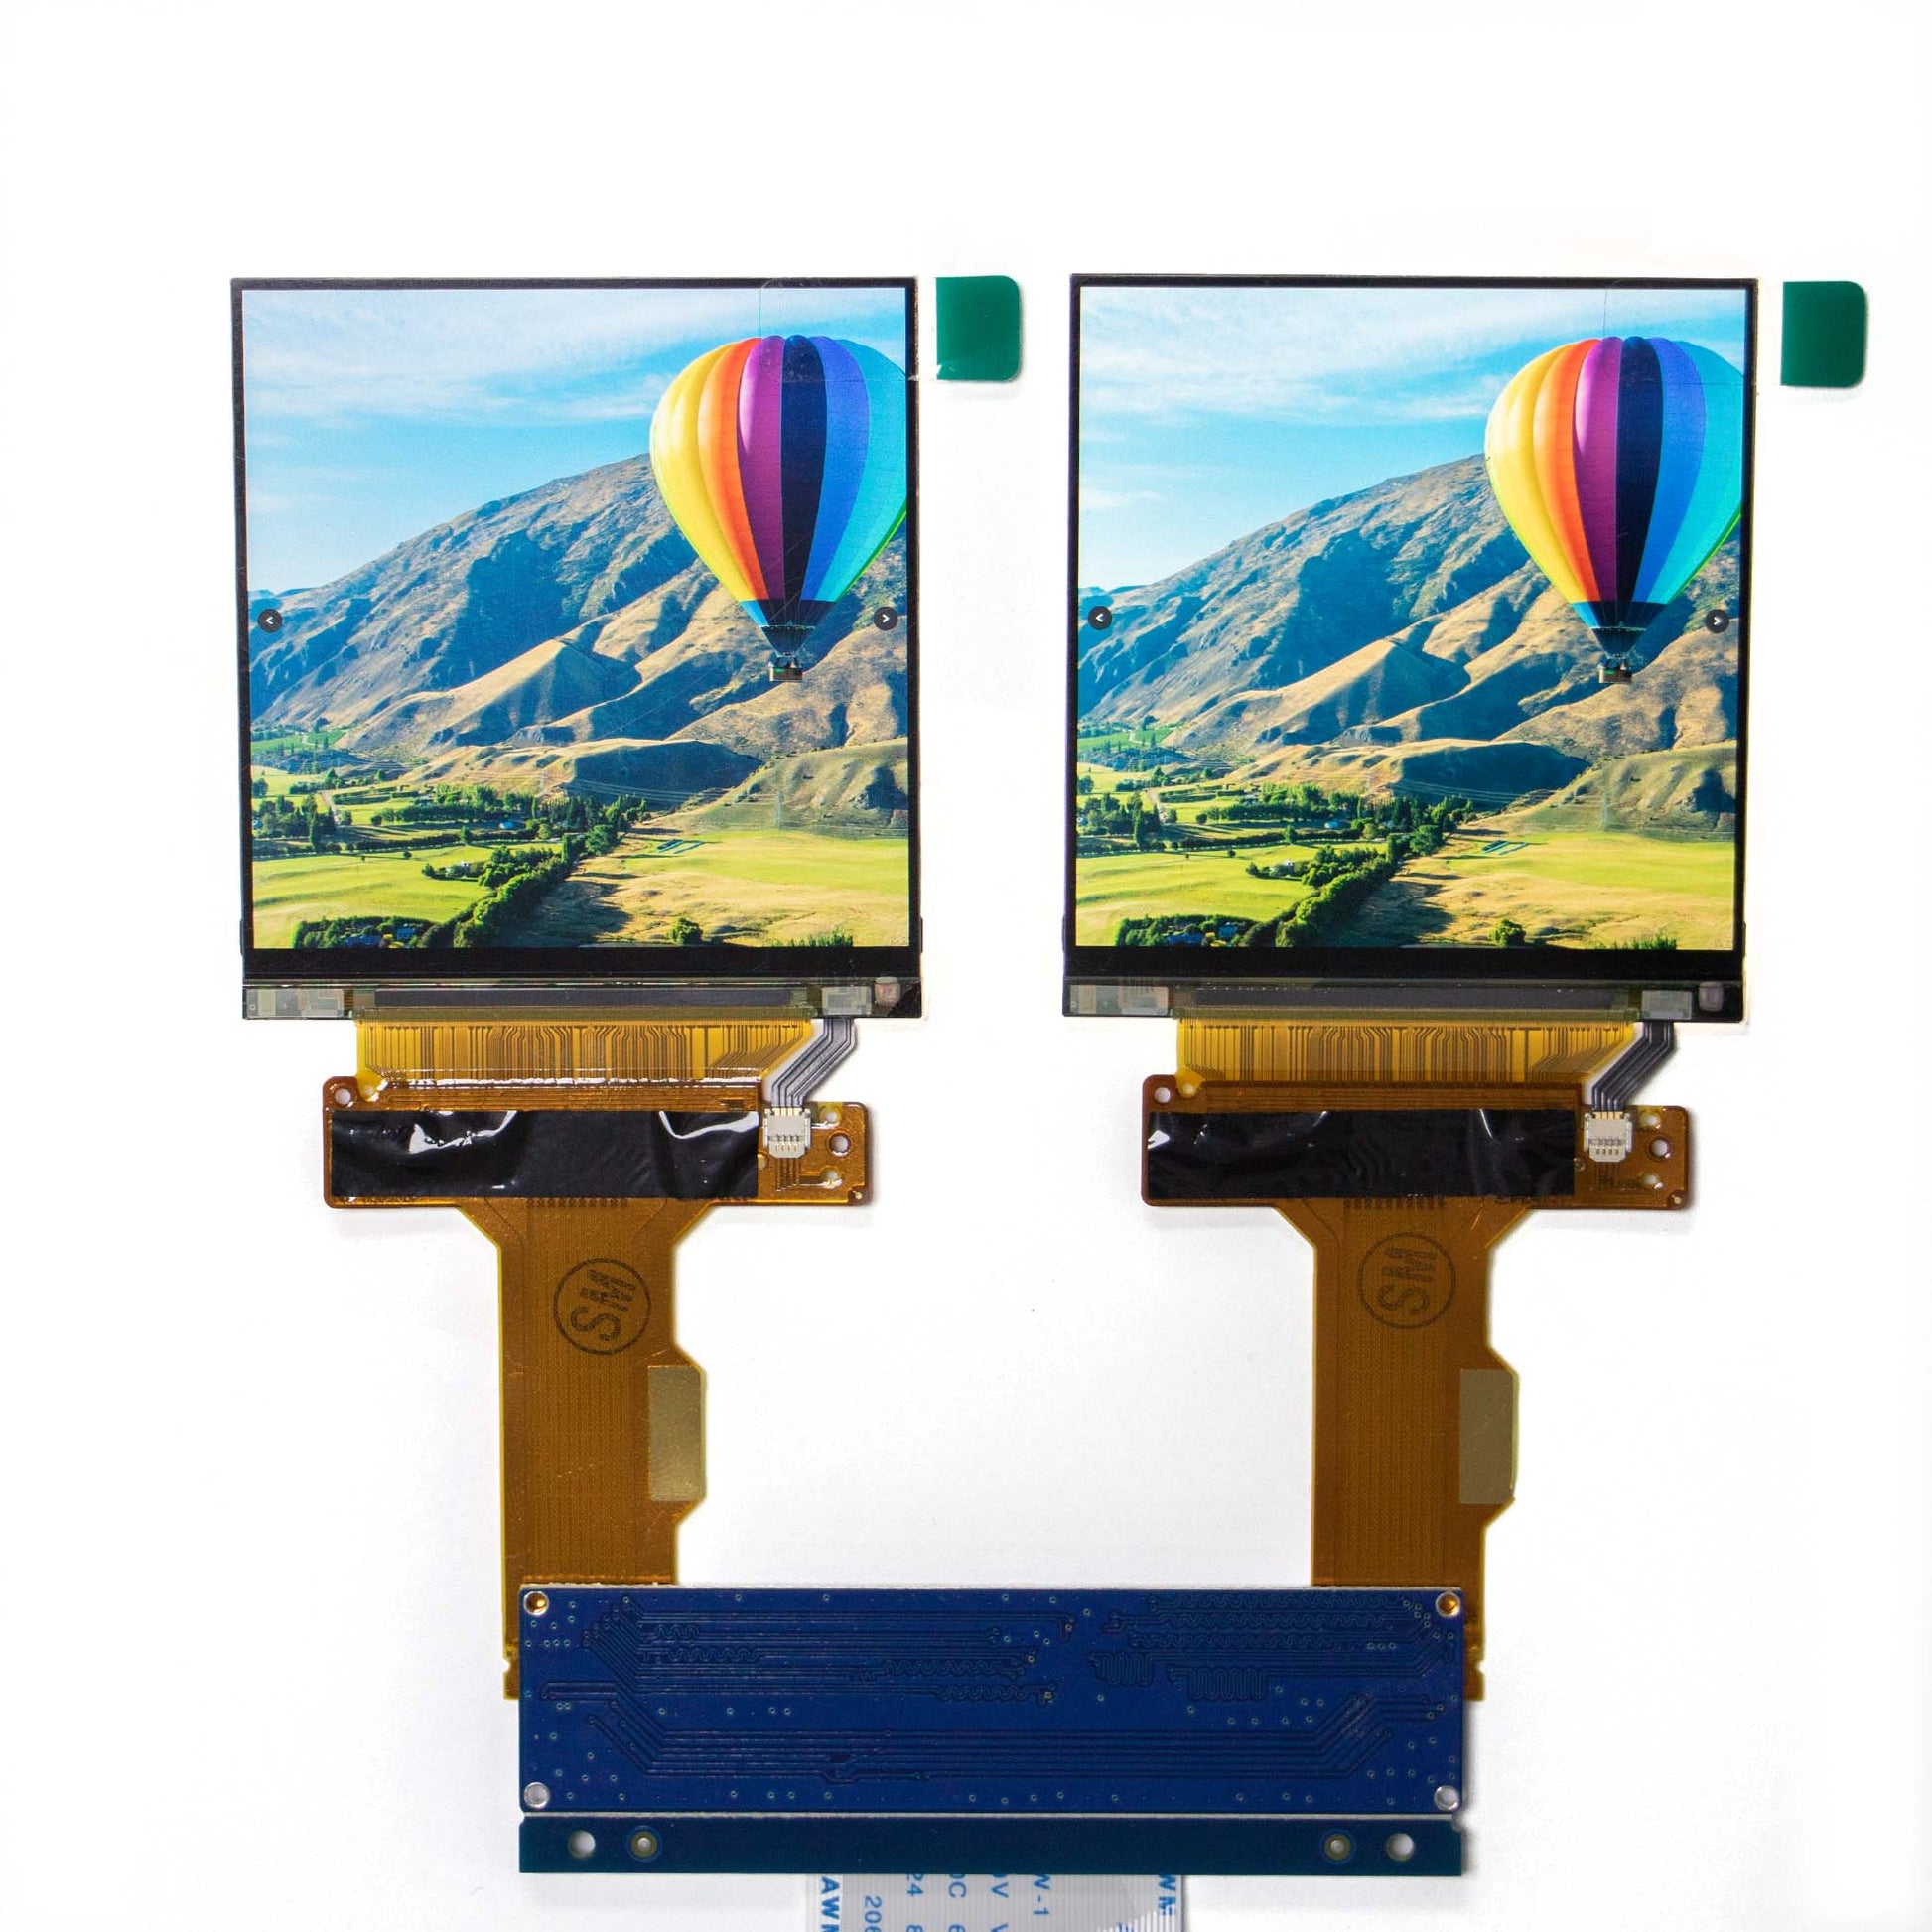 2.89-inch high-resolution Sharp display panel for VR, showing an image of a hot air balloon